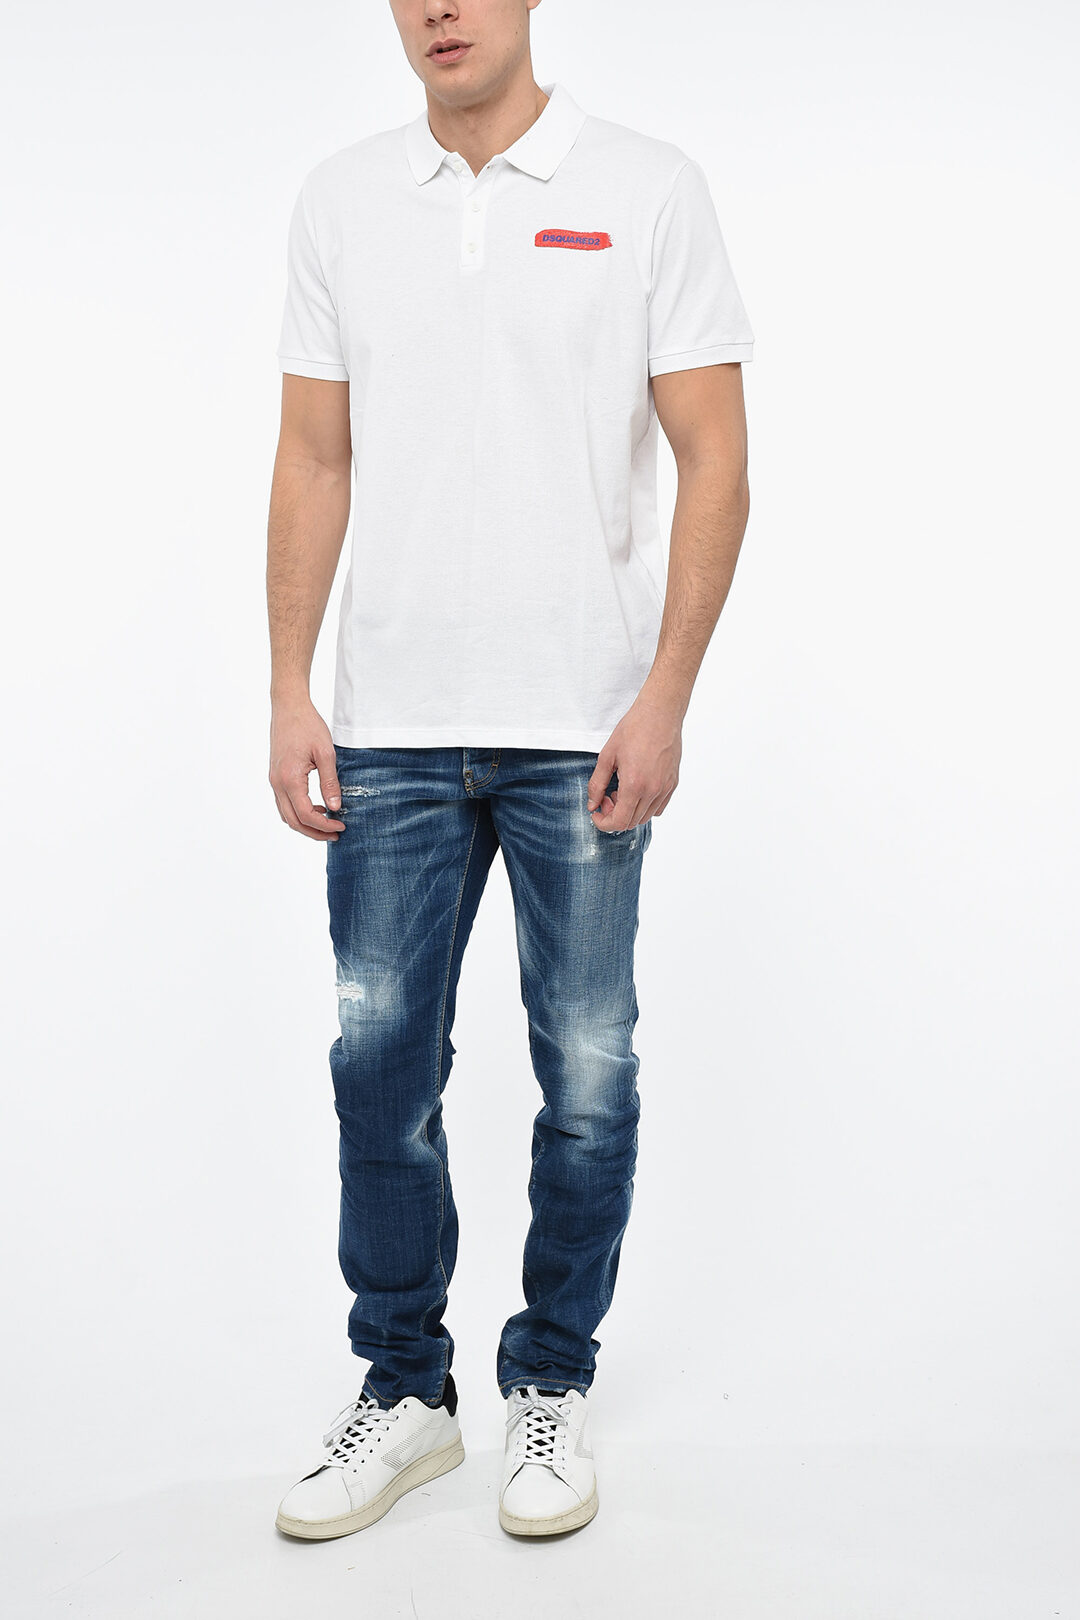 Scappino - The perfect casual outfit: polo shirt, jeans and sneakers. In  https://www.scappino.com El outfit casual perfecto: polo, jeans y tenis. En  https://www.scappino.com #Scappino #HeritageForward | Facebook